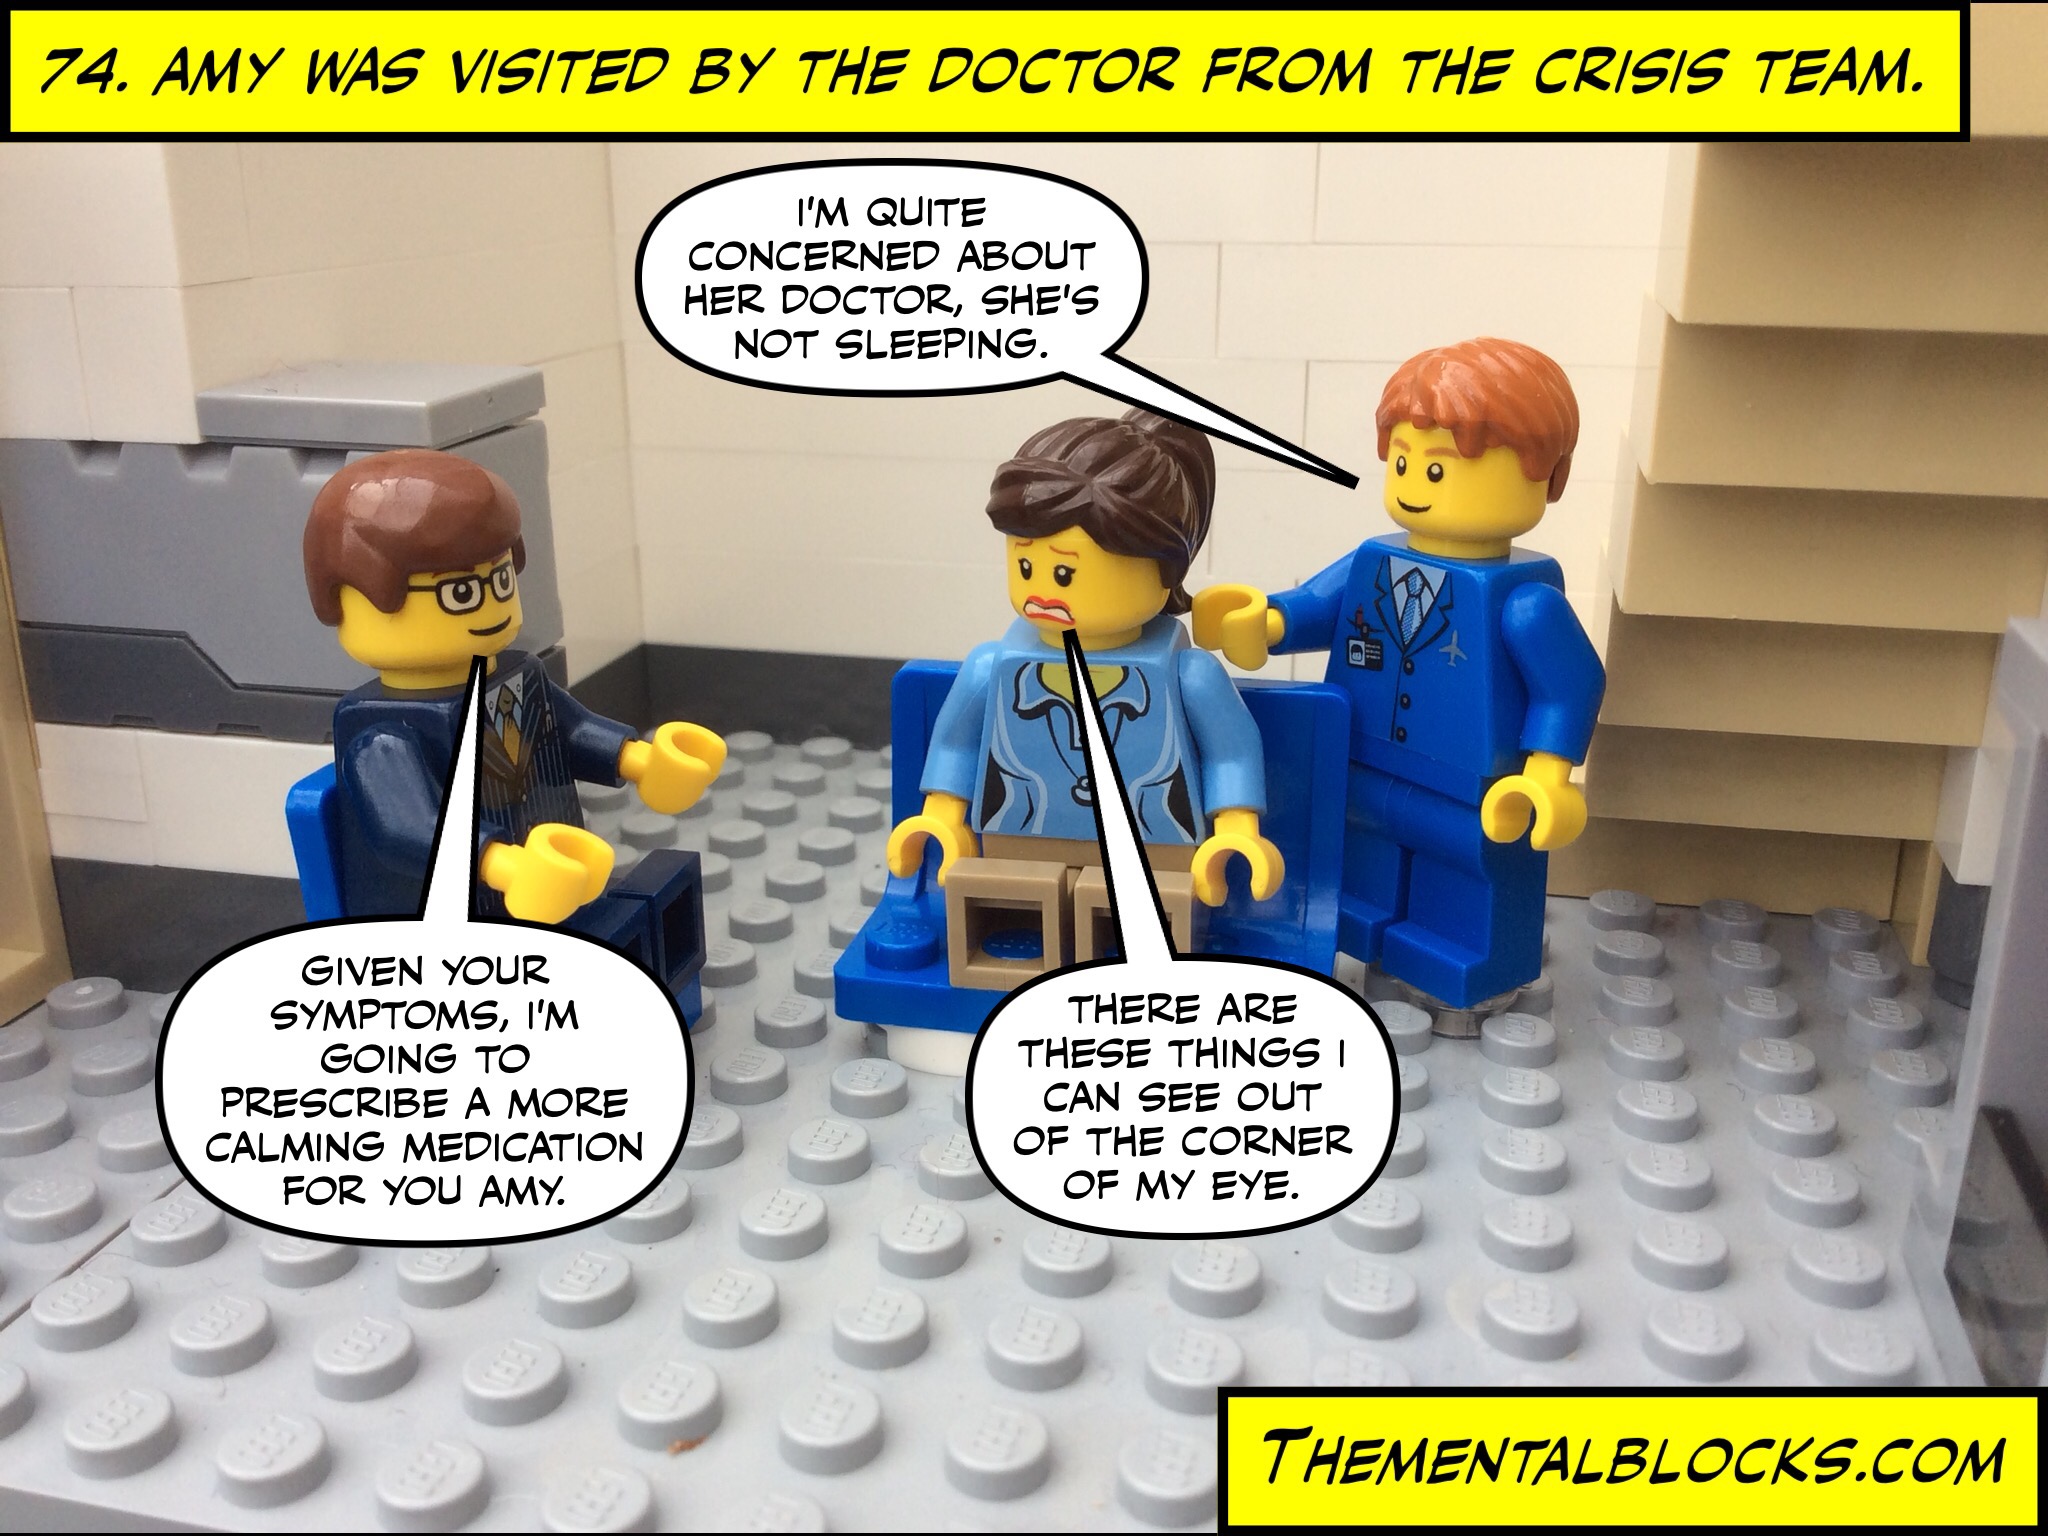 Amy was visited by the Doctor from the crisis team